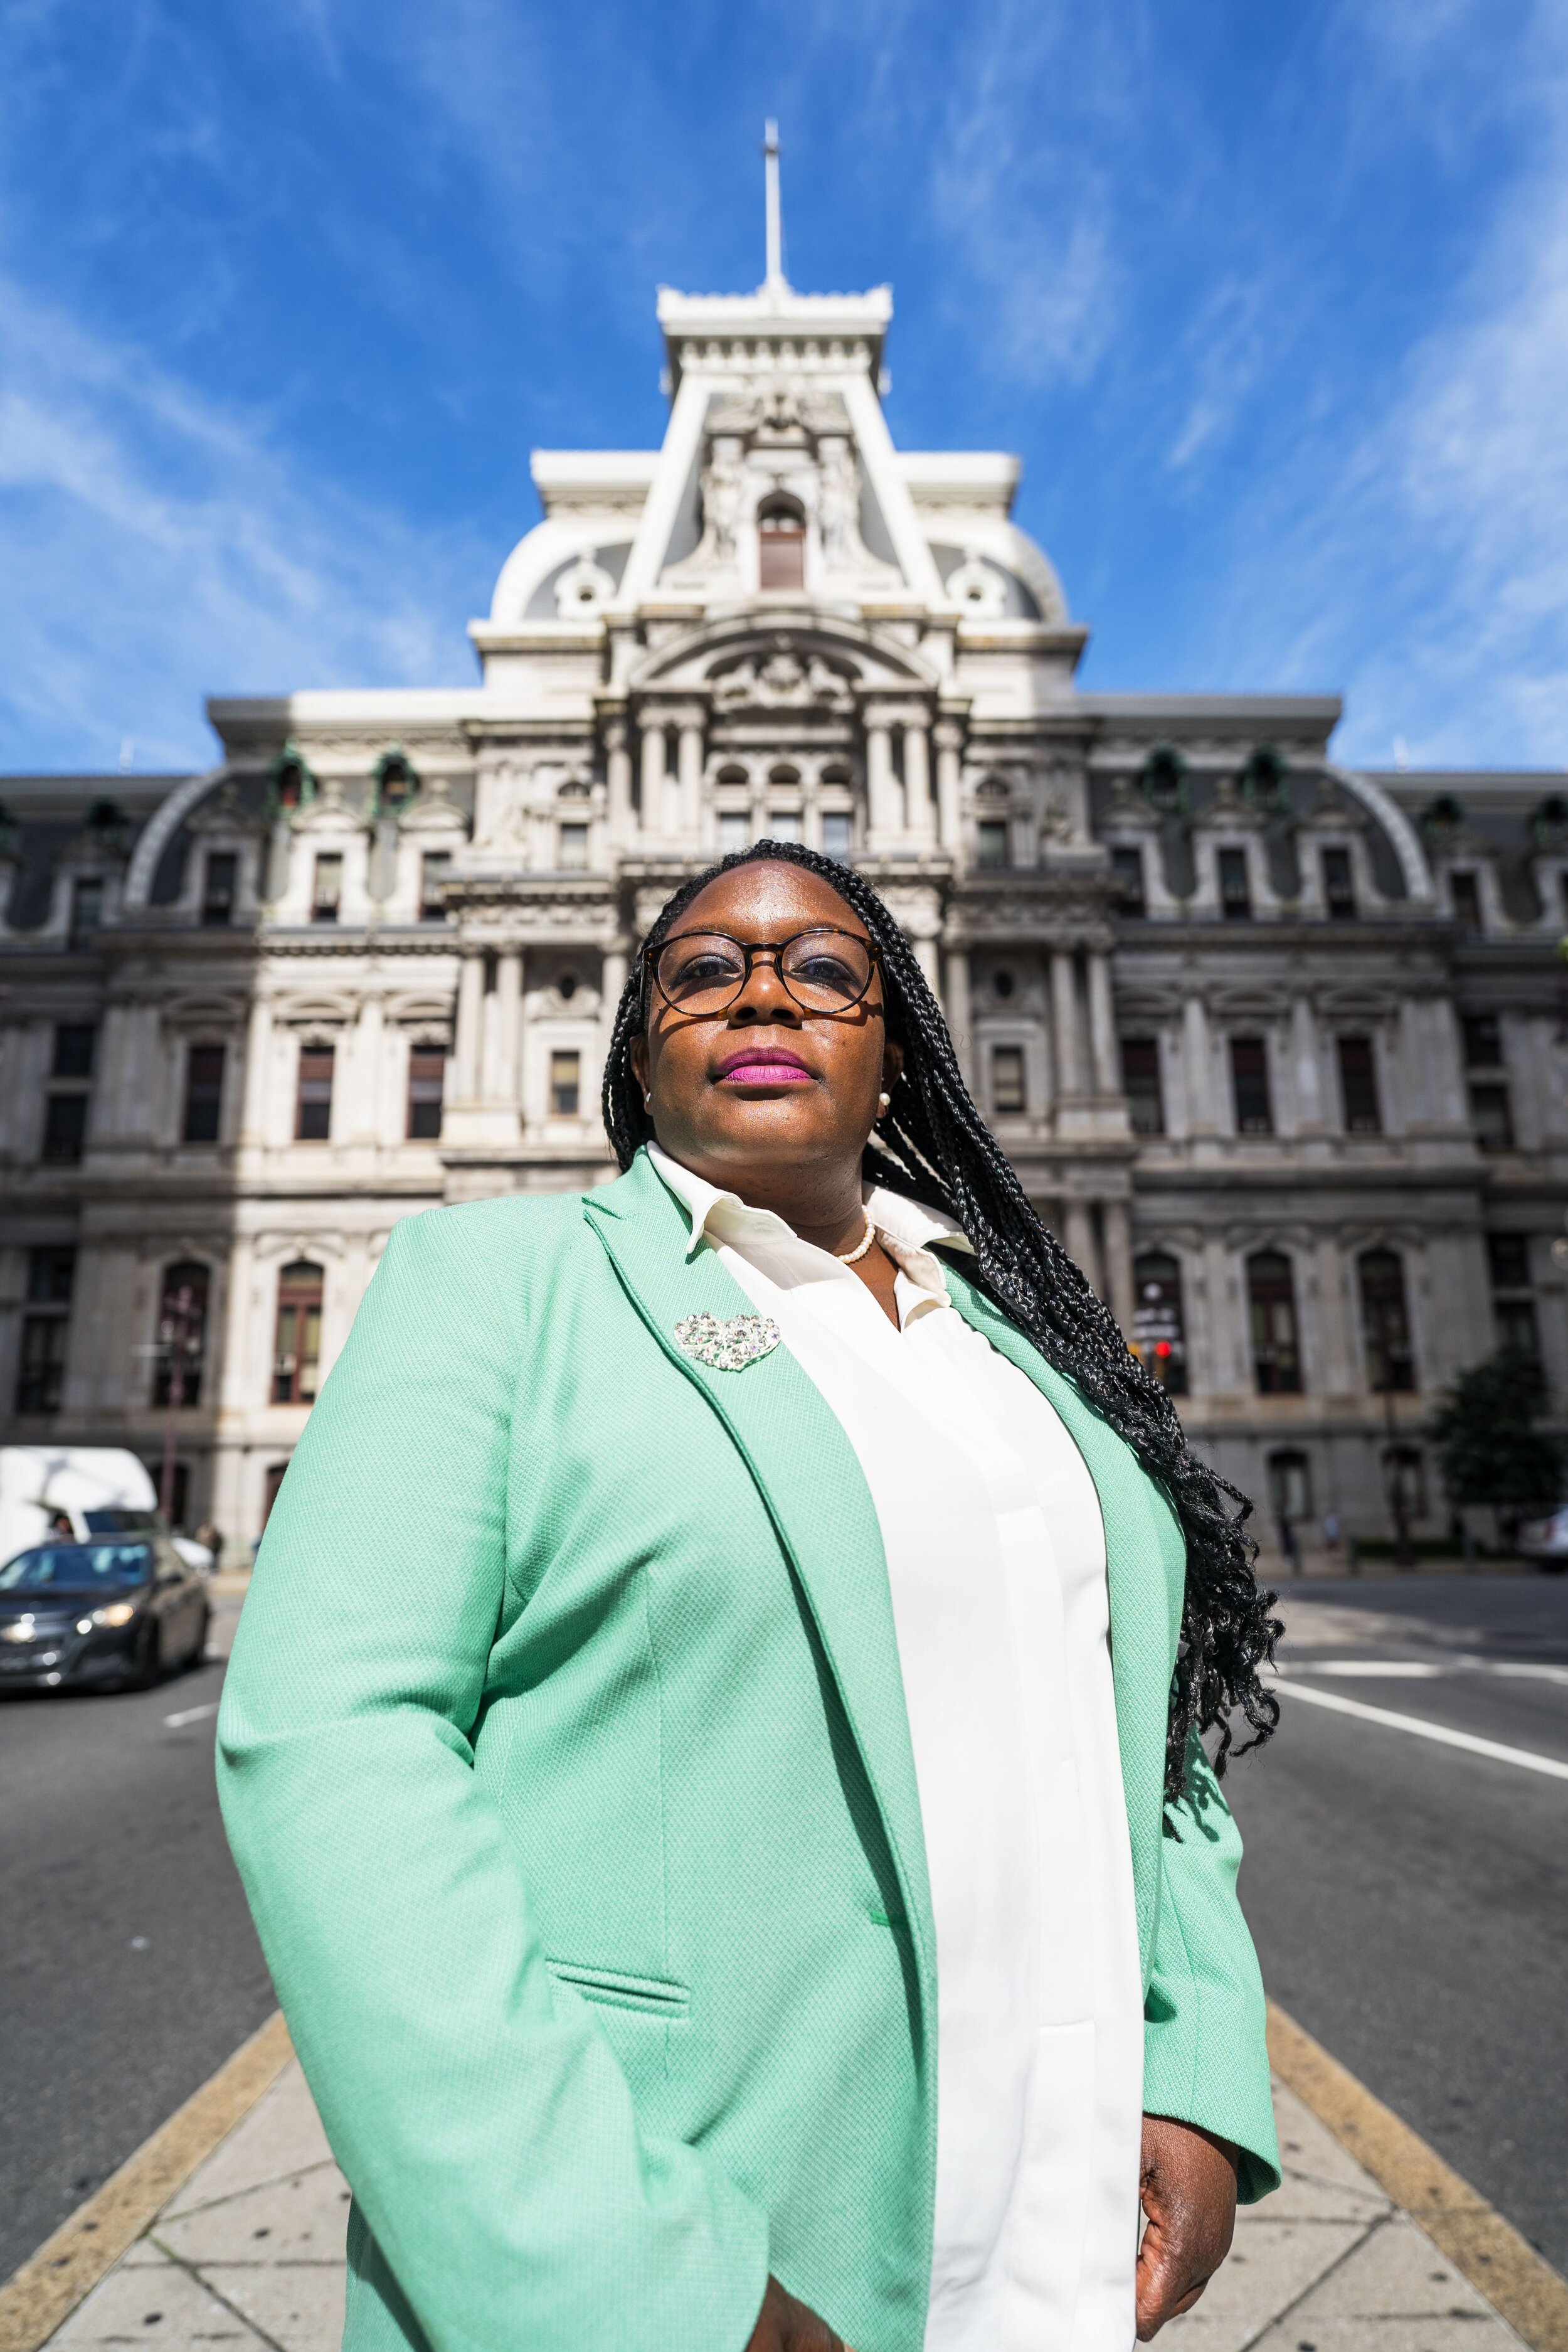 Councilmember Kendra Brooks pictured in front of Philadelphia City Hall. Photography of Kendra Brooks by Drew Dennis.